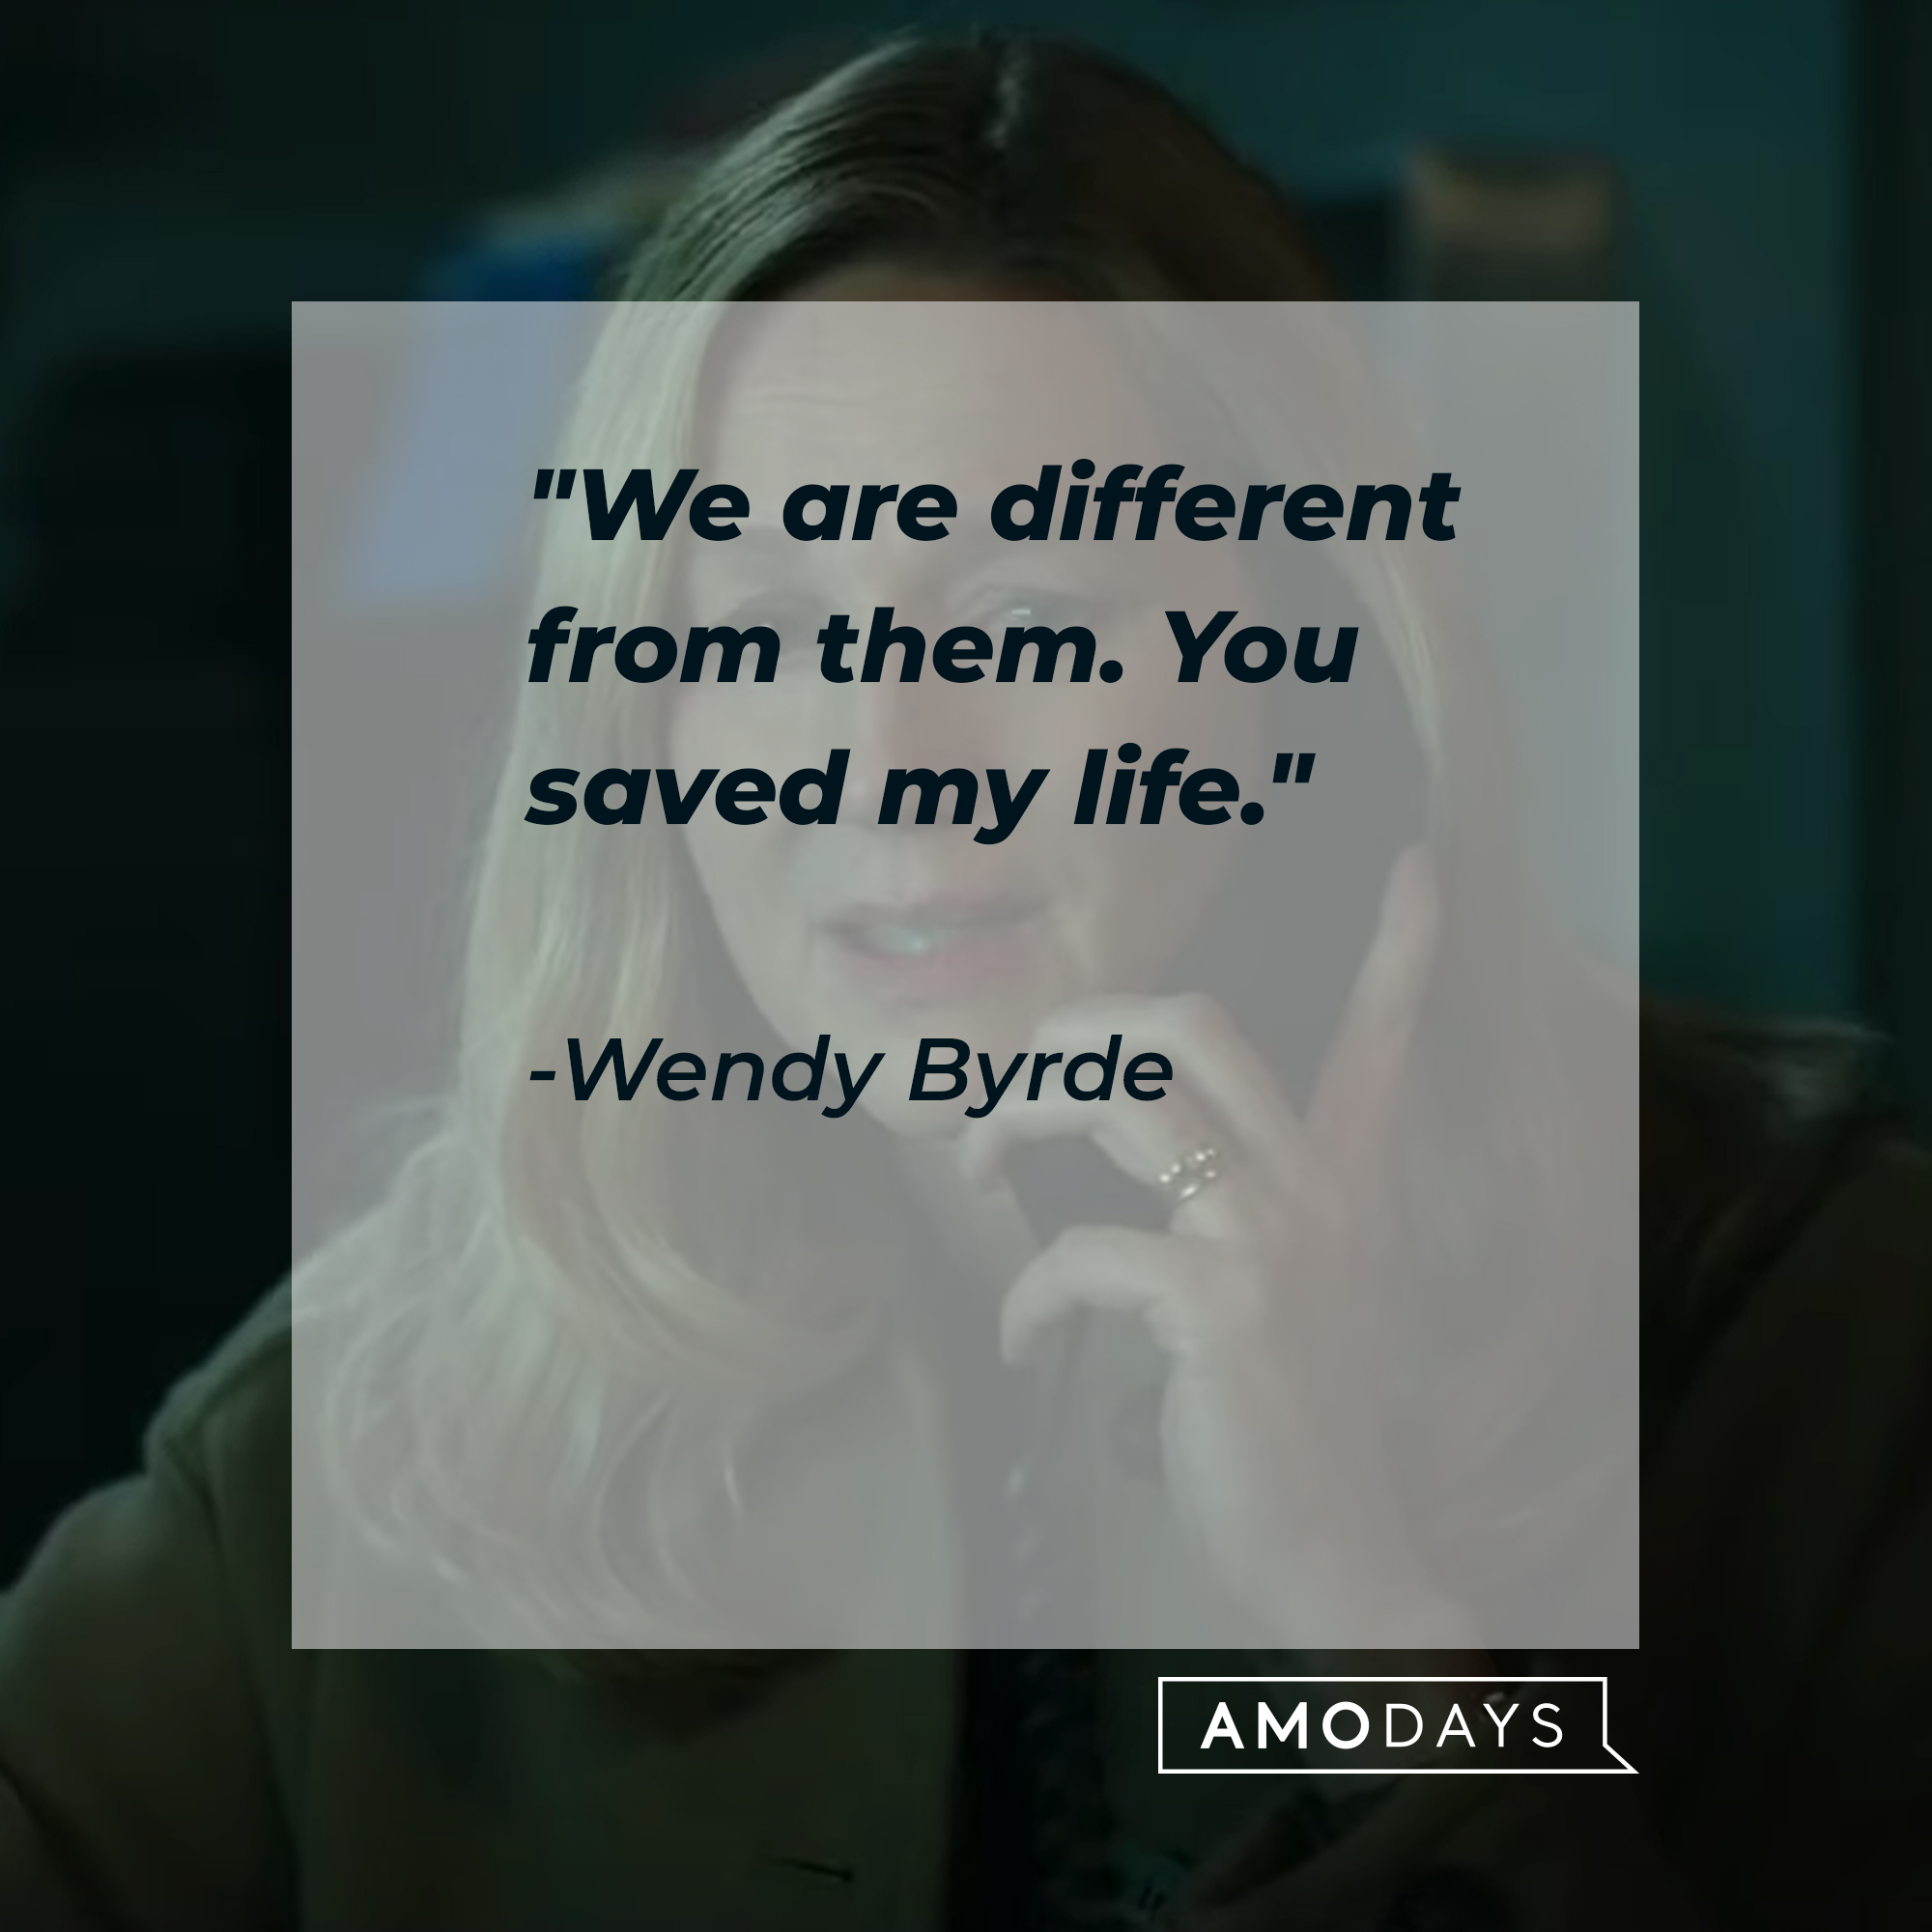 Wendy Byrde’s quote: “We are different from them. You saved my life.” | Source: facebook.com/OzarkNetflix